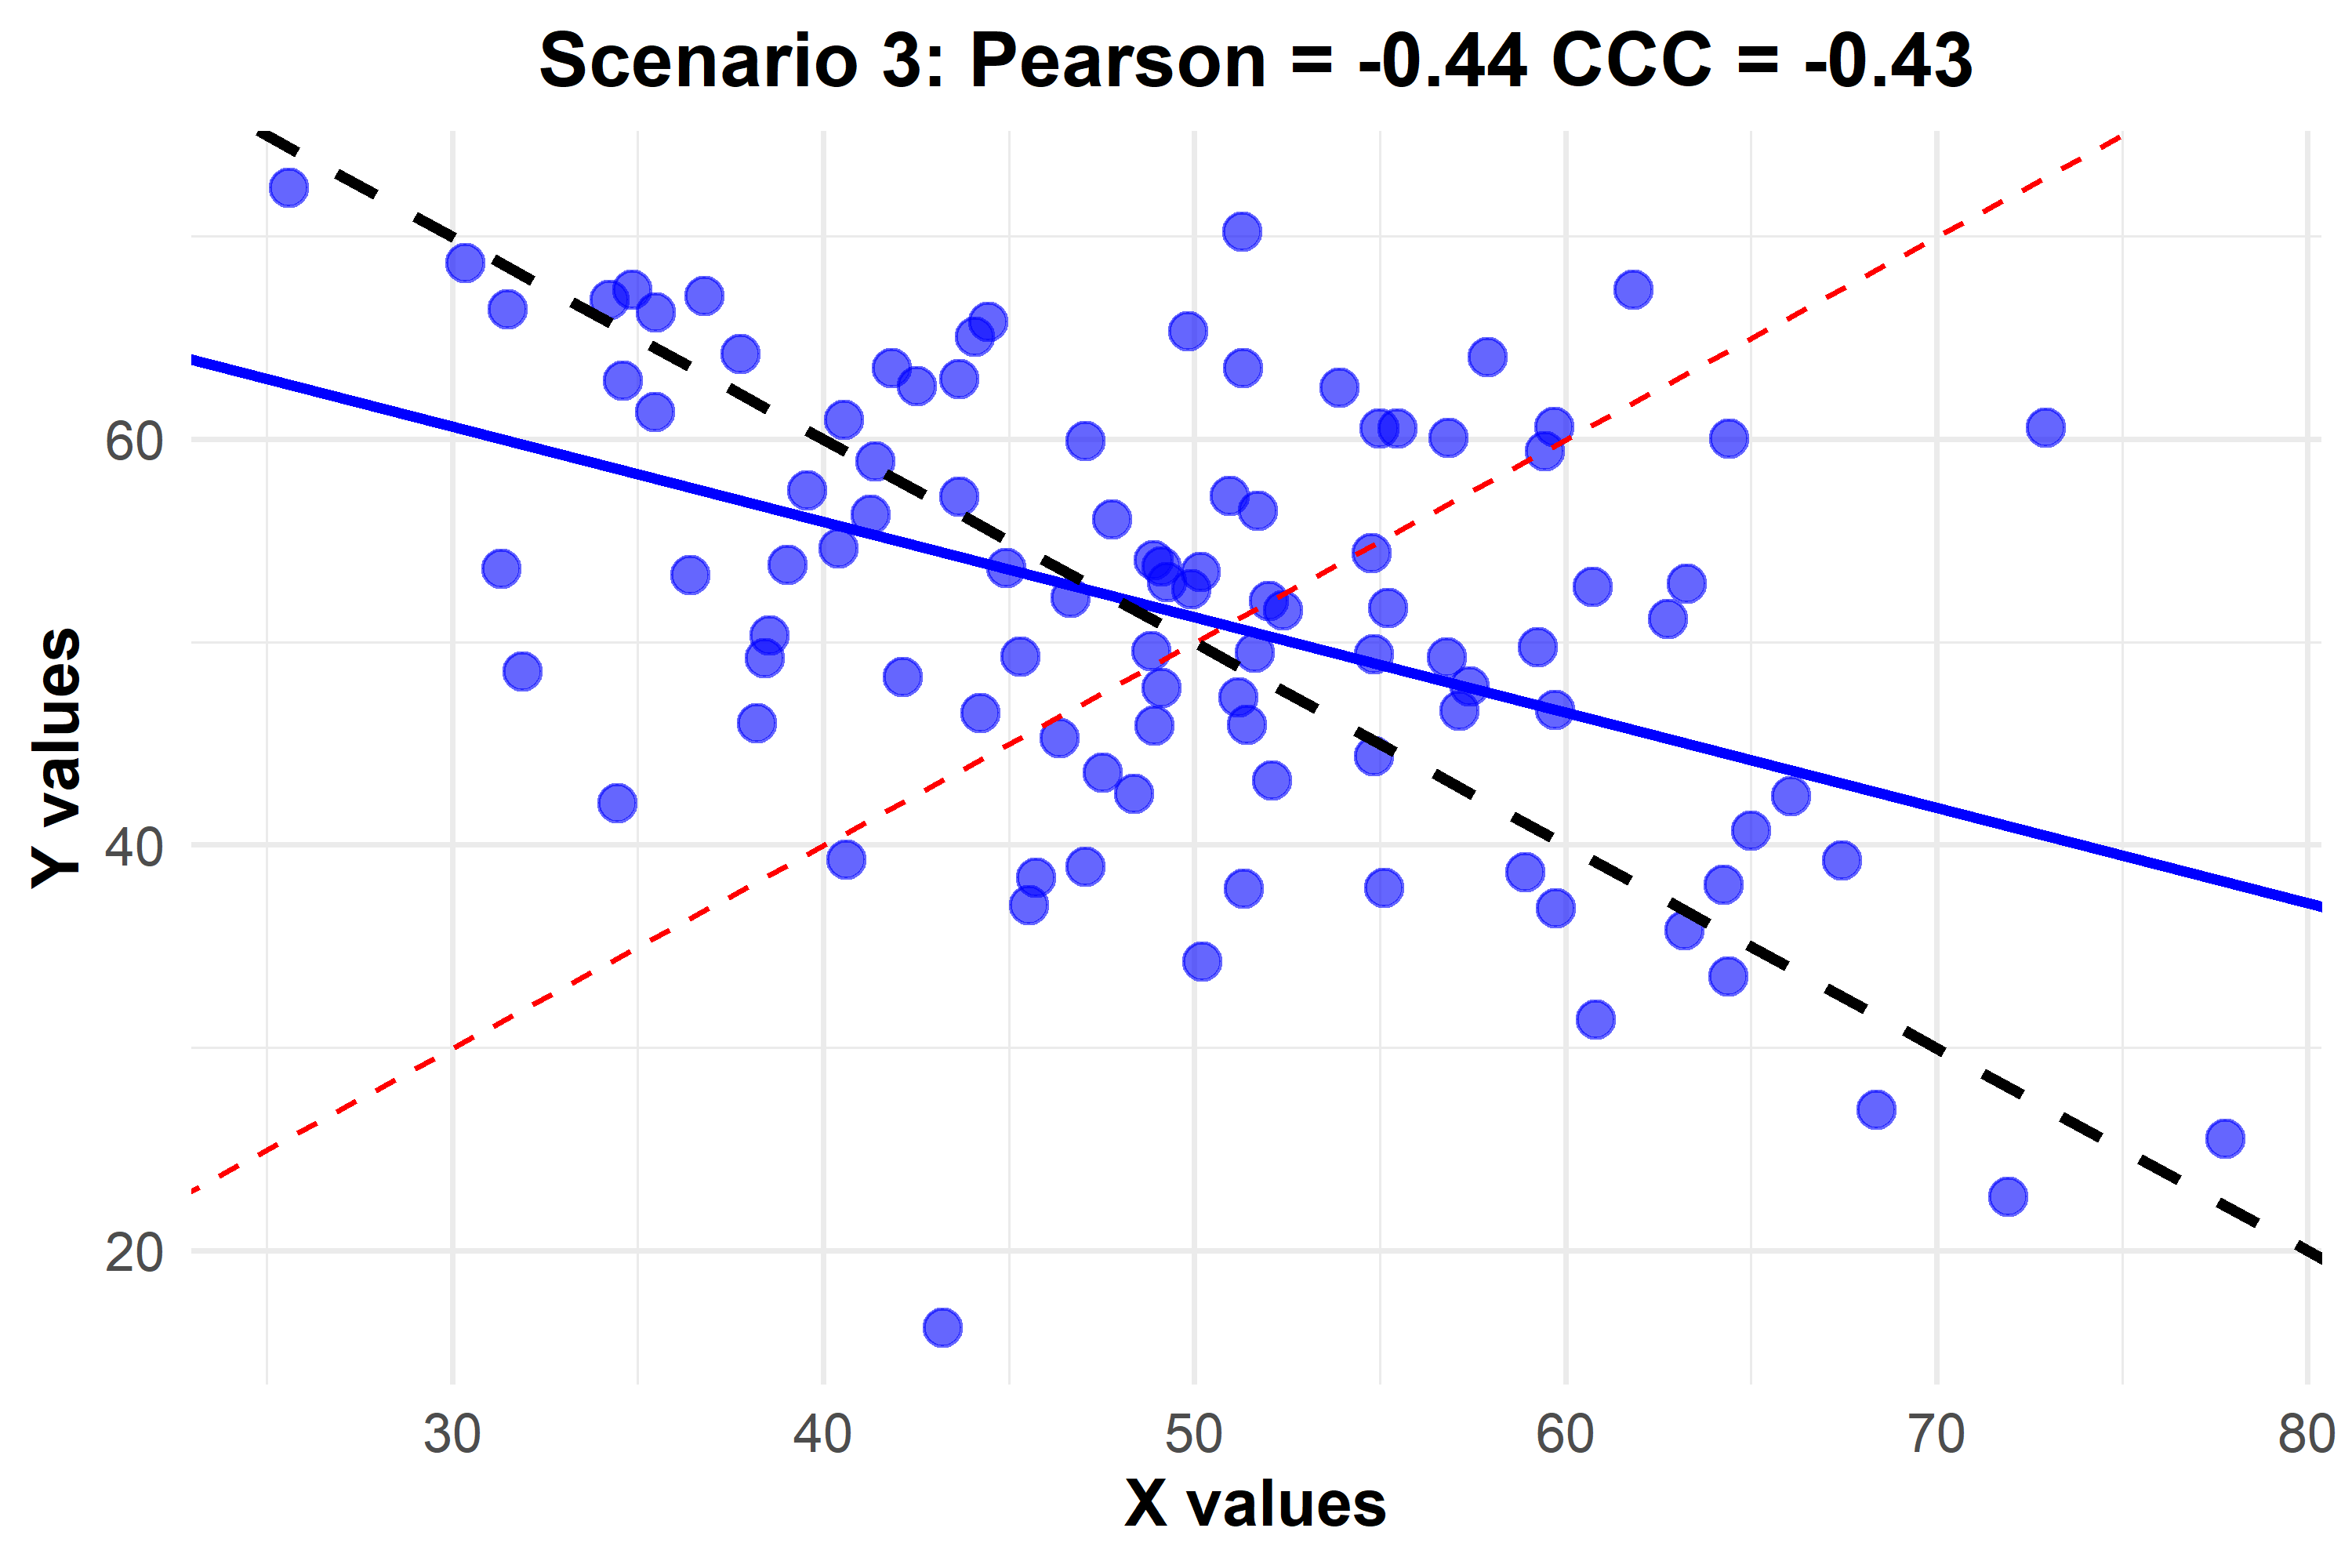 Scenario 3: Inverse relationship with both Pearson correlation and CCC around -0.44. The red dashed line represents $Y = X$, the black dashed line is the $Y = 100 - X$, and the blue solid line is the best fit line